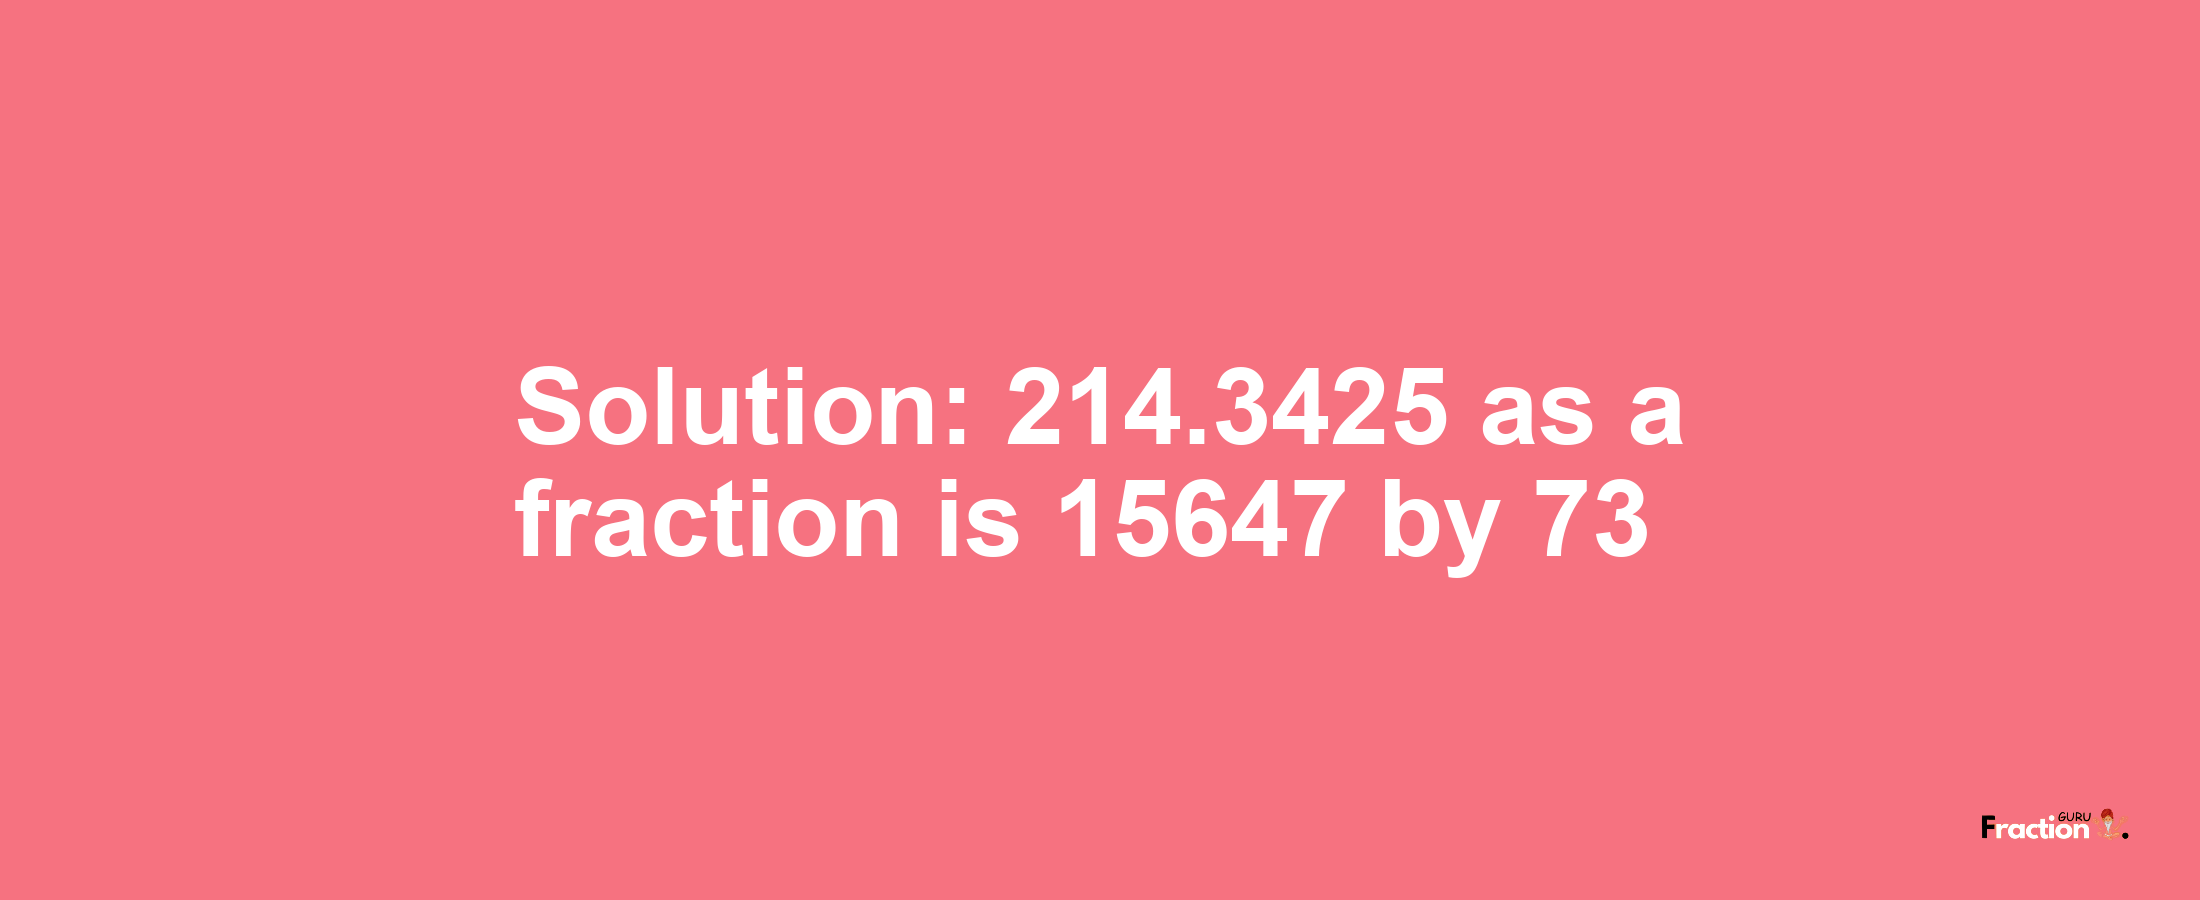 Solution:214.3425 as a fraction is 15647/73